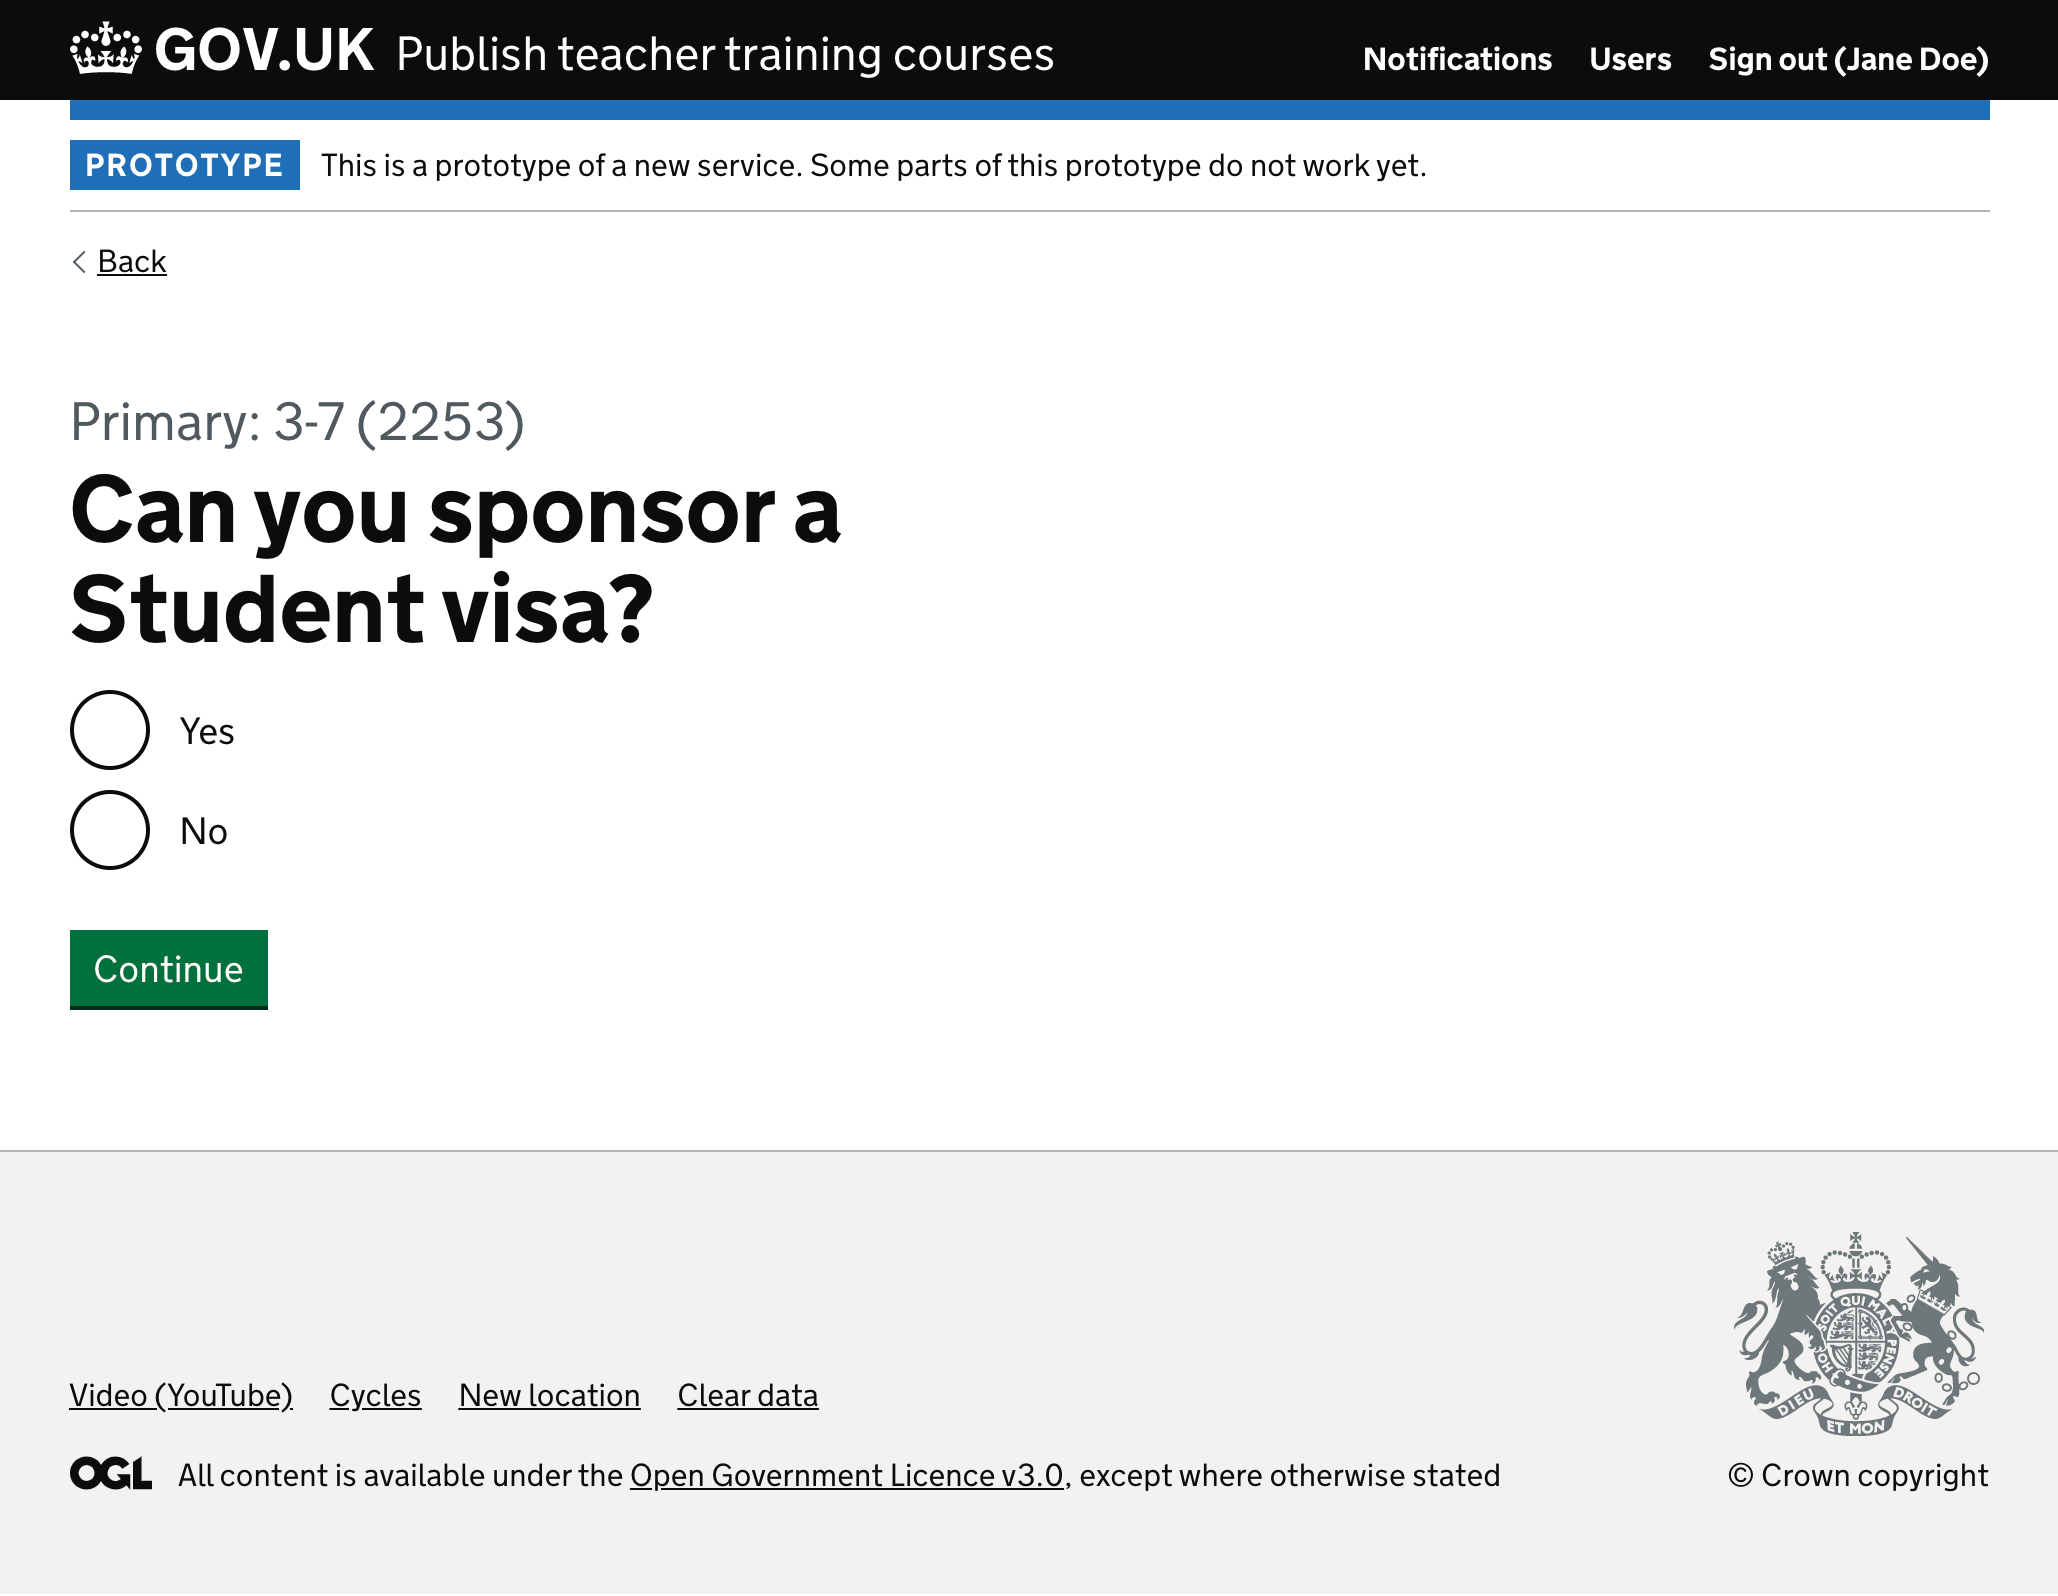 Screenshot of visa sponsorship question on a course page.